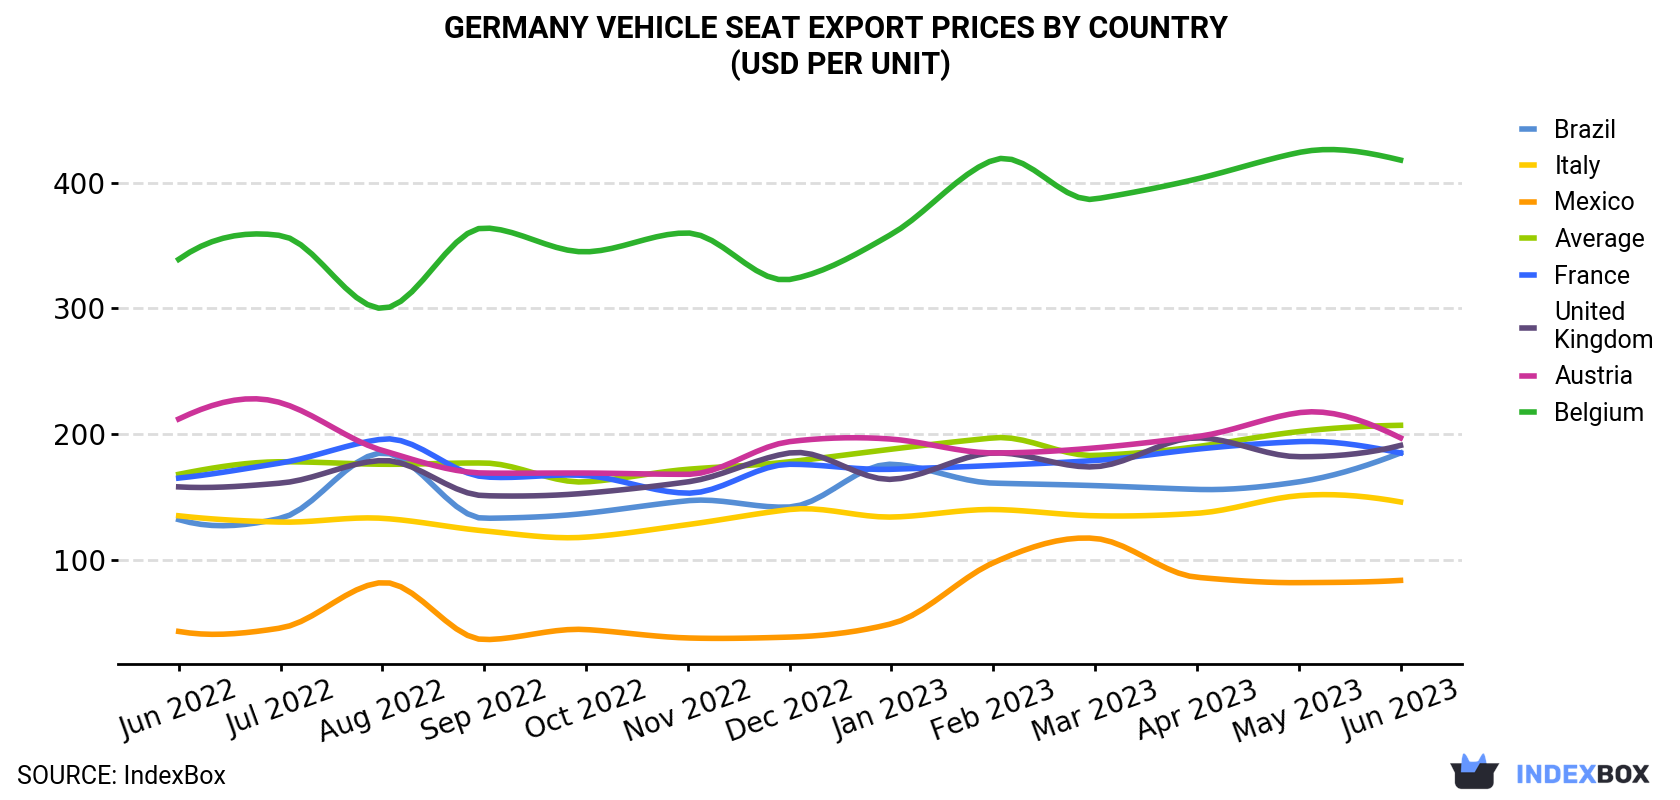 Germany Vehicle Seat Export Prices By Country (USD Per Unit)